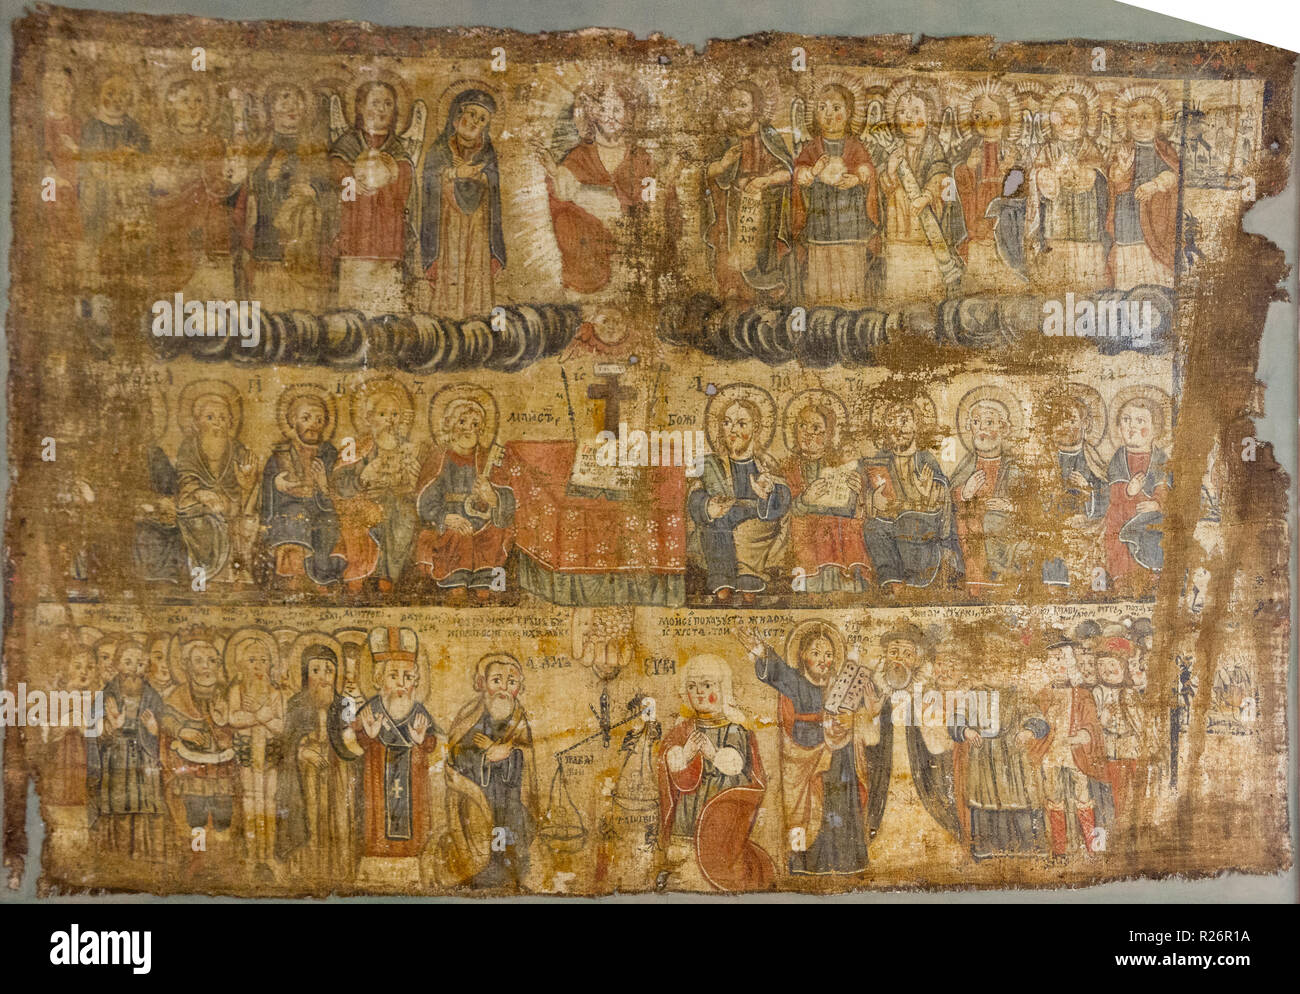 The Last Judgement on a canvas from a church. Currently in a museum. Stock Photo